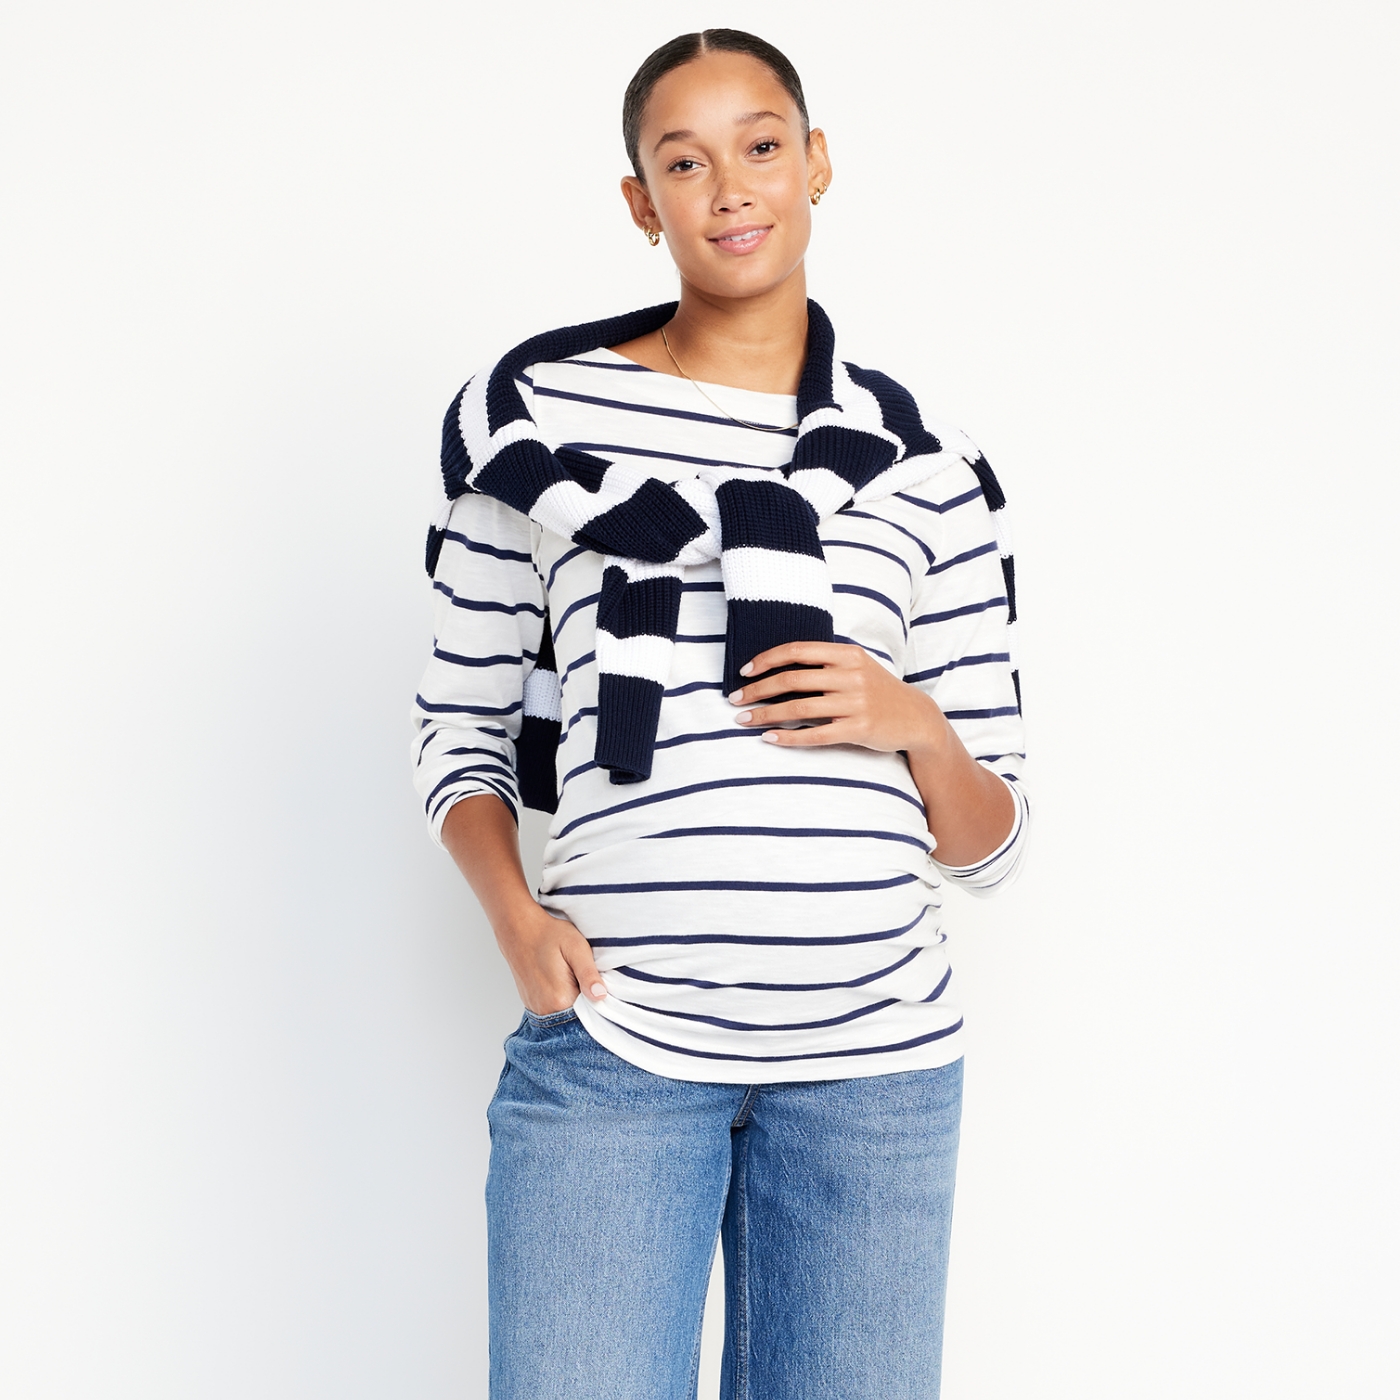 A maternity model dressed in jeans and a striped top.